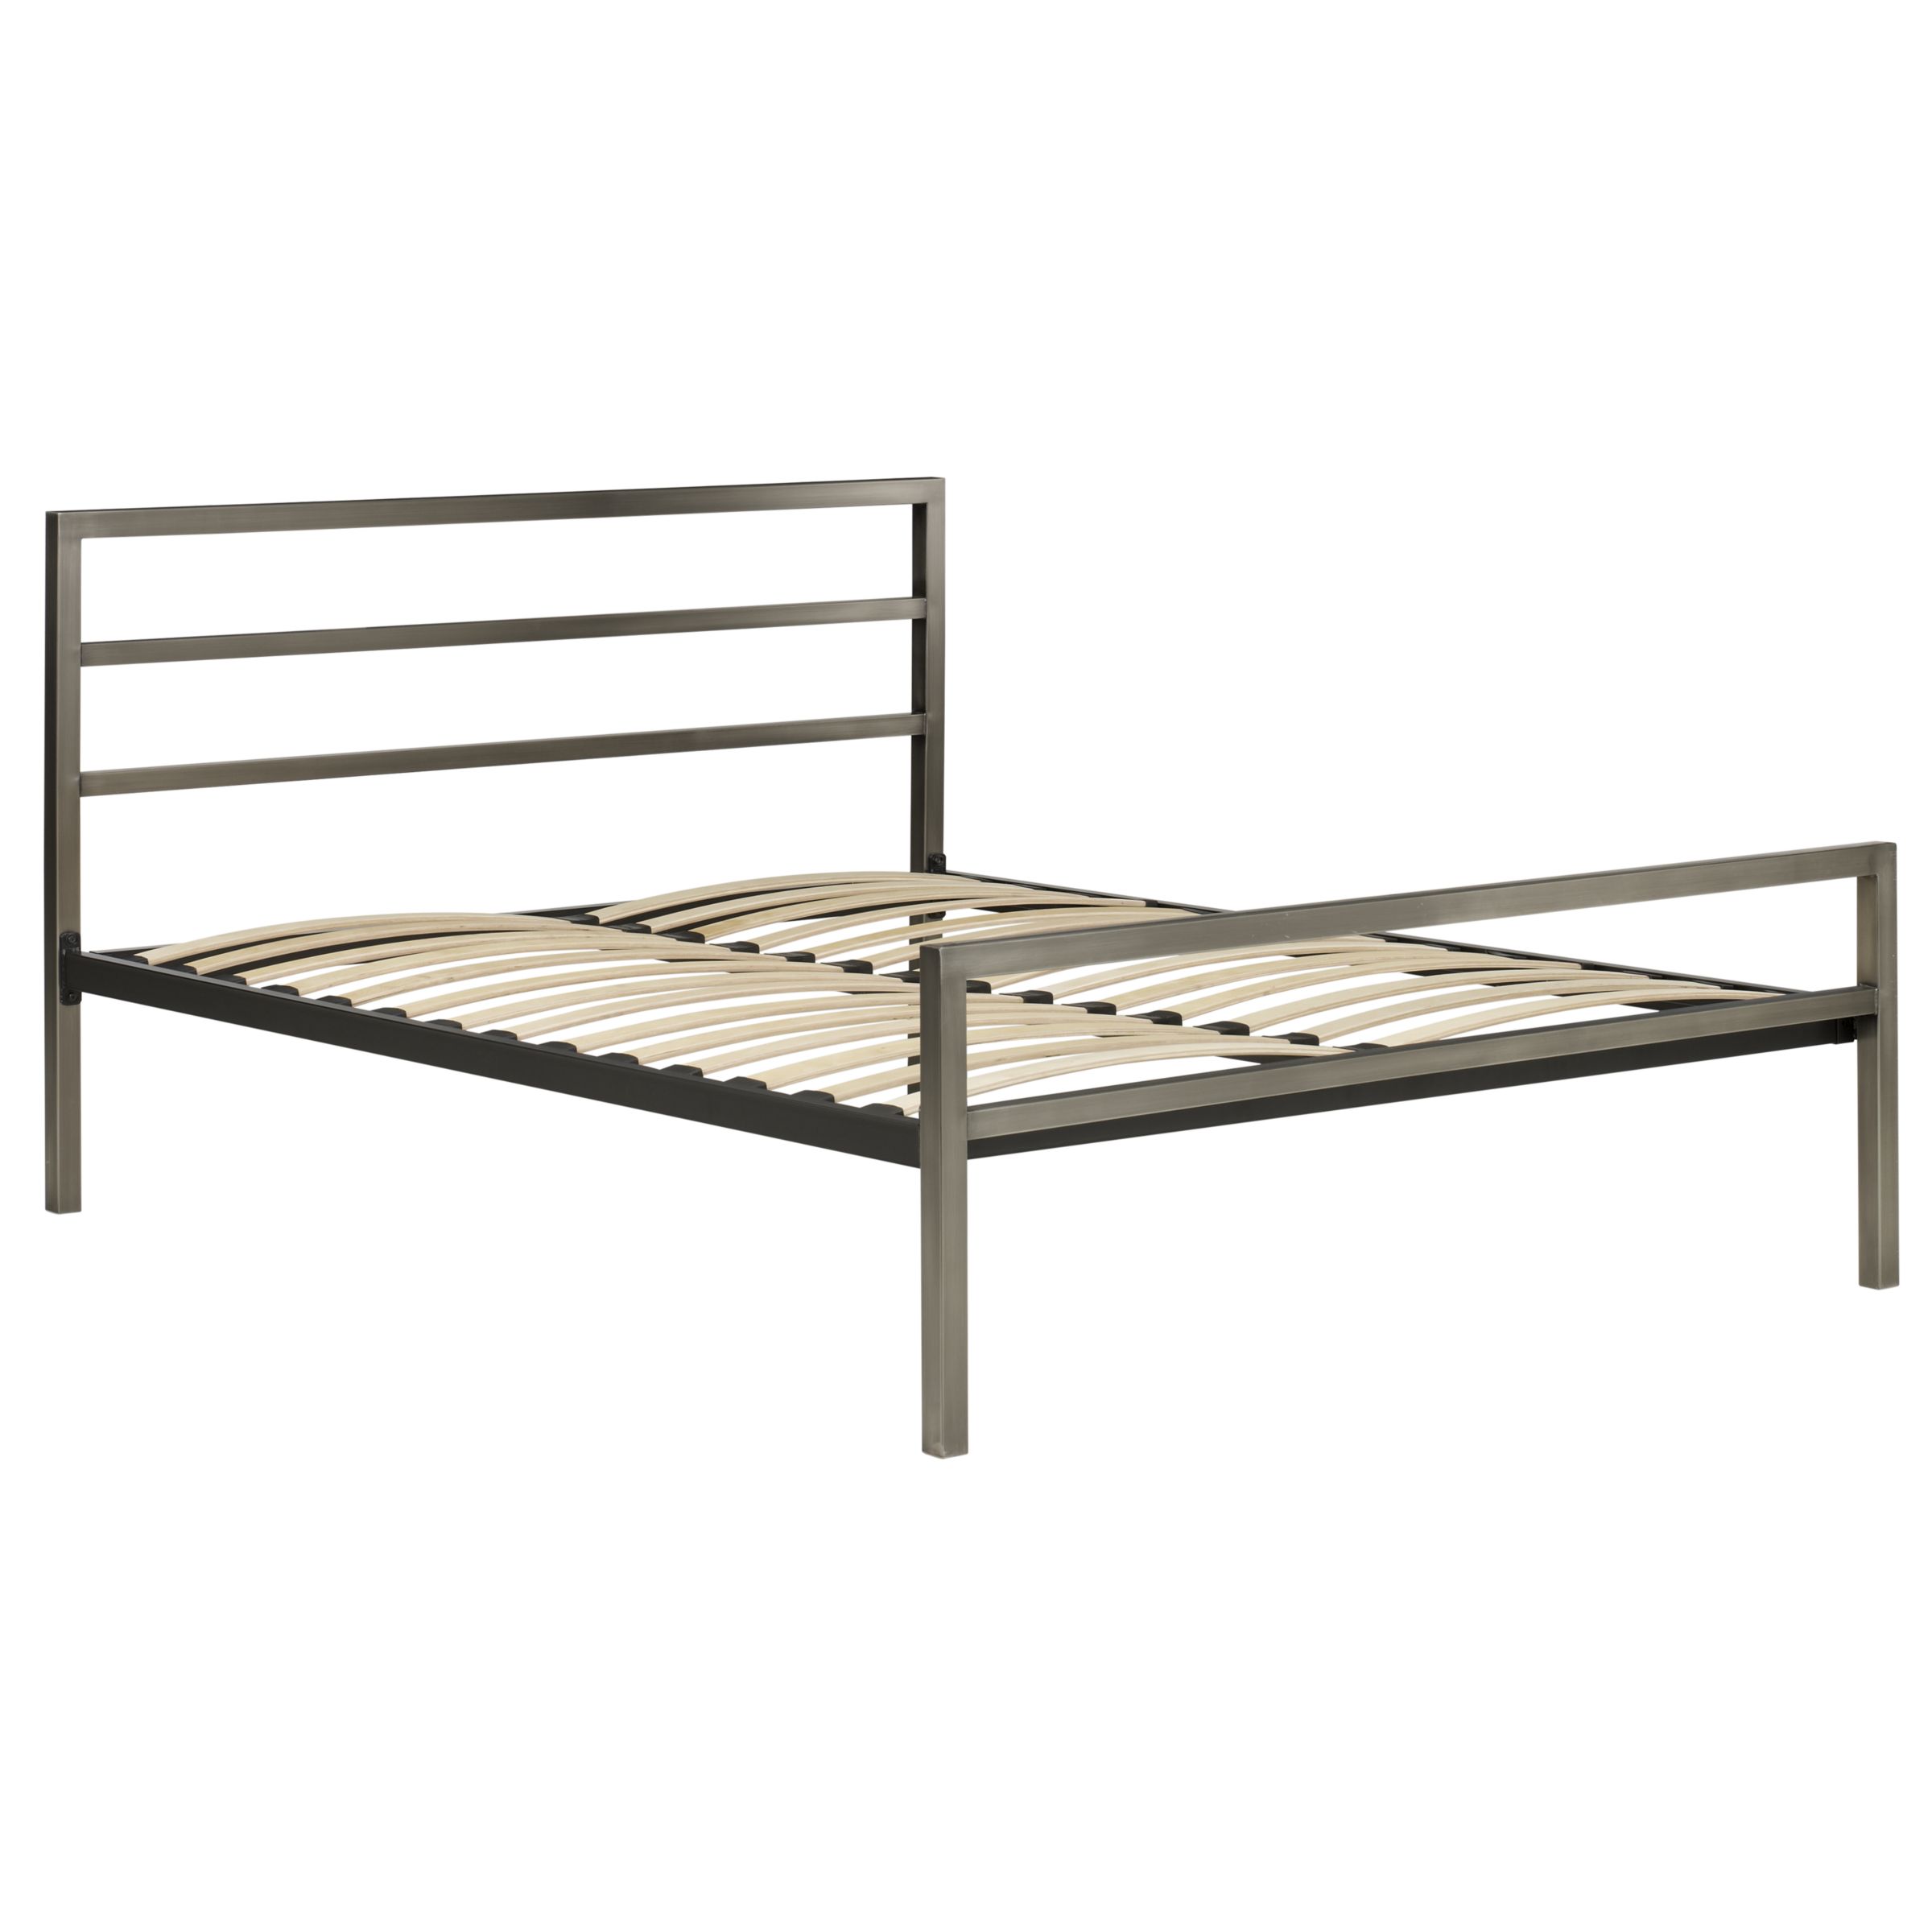 John Lewis Sherford Bedstead, Double